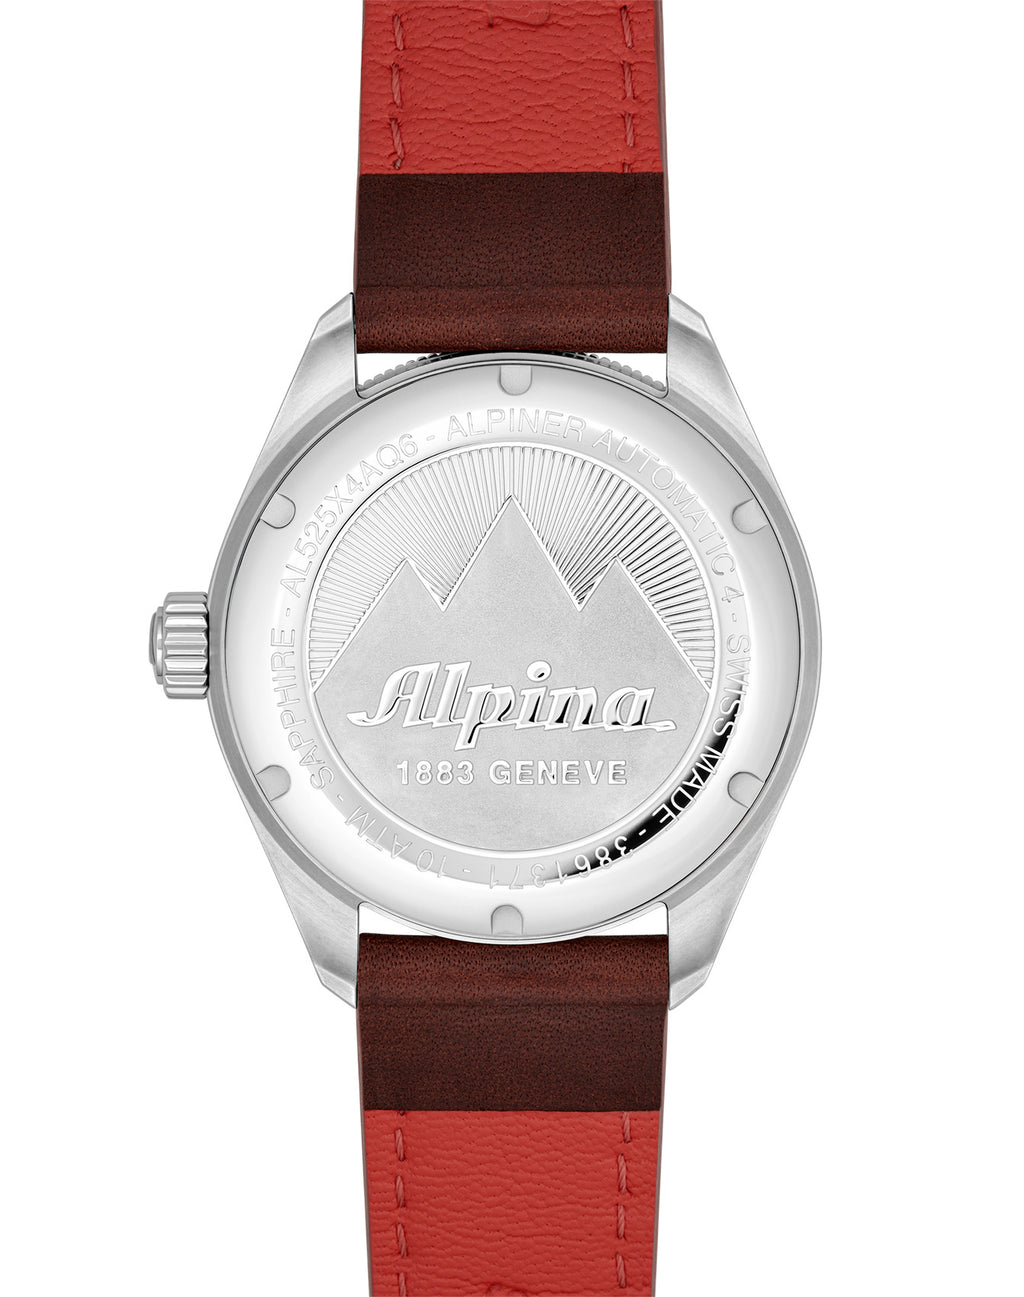 Alpiner 4 Automatic : Automatic men's watch – Alpina Watches